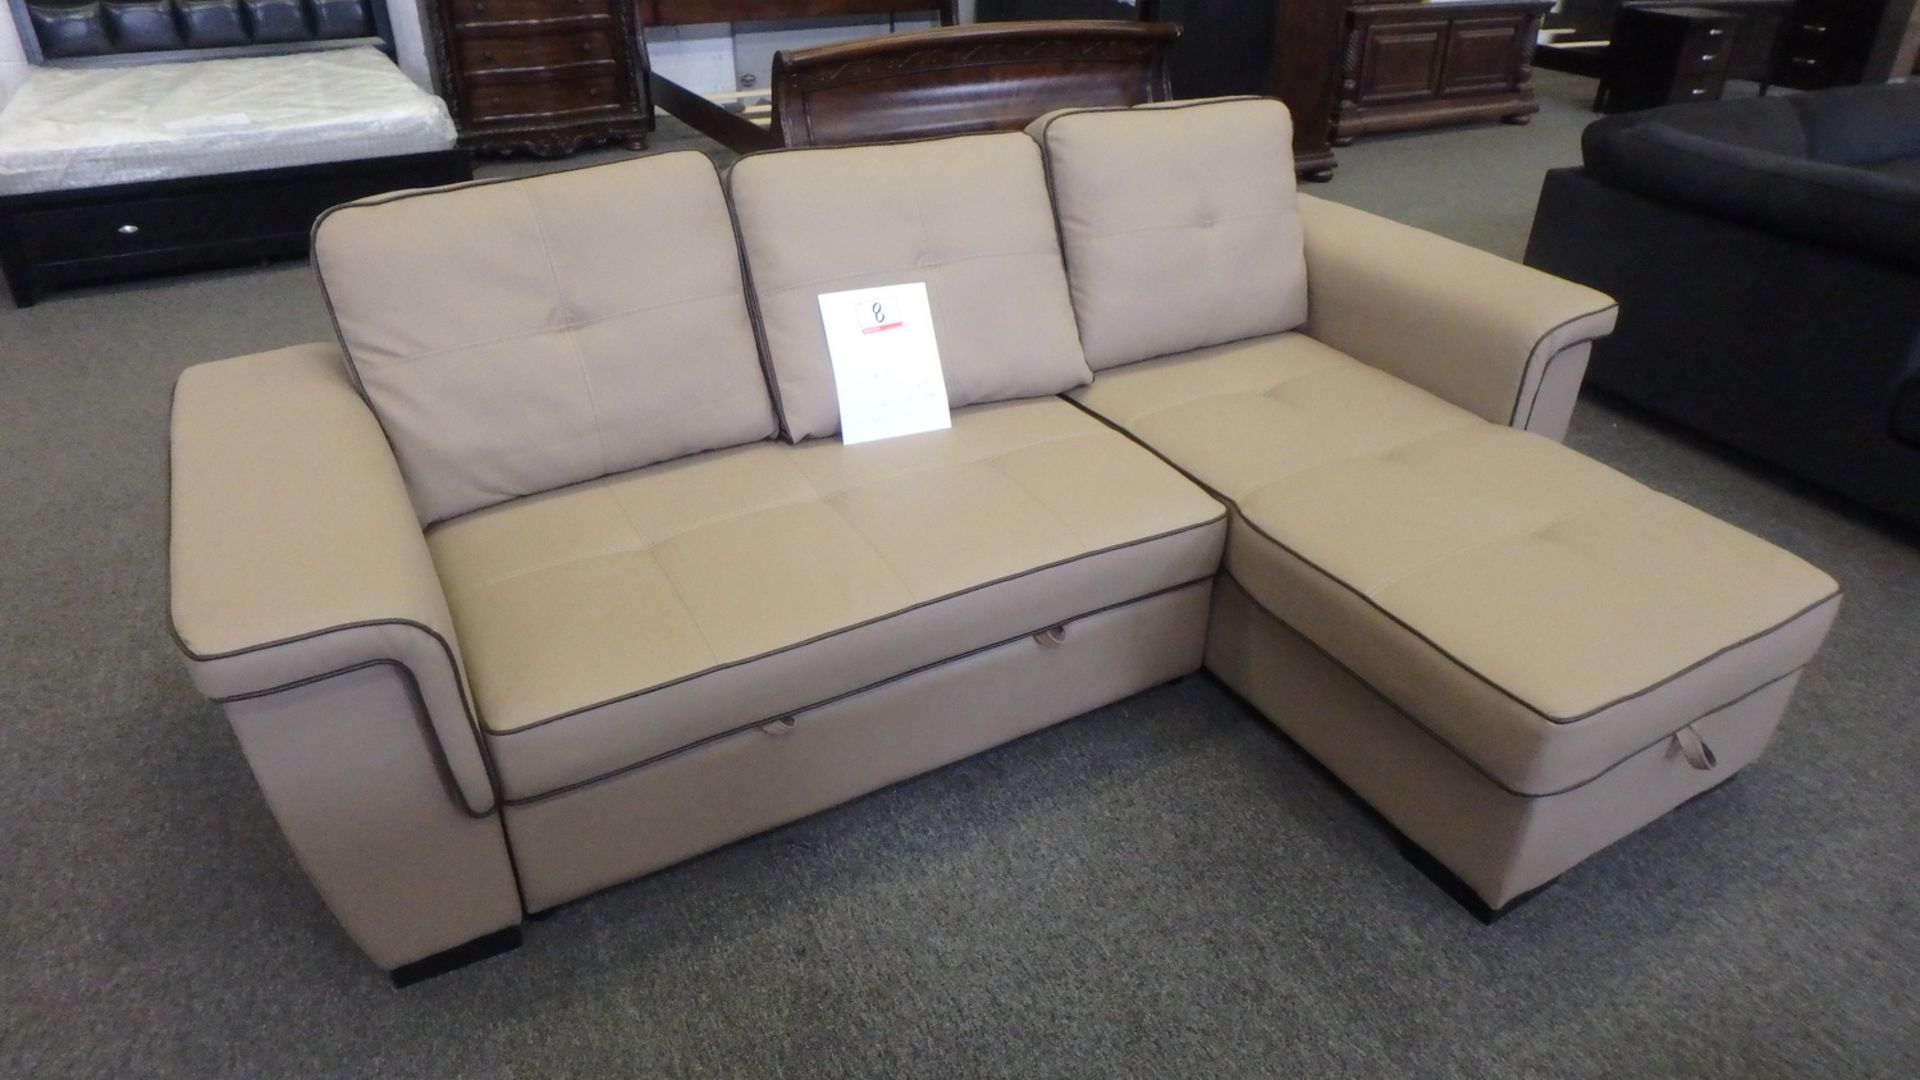 LATTE BROWN PU LEATHER SOFA / CONVERTIBLE BED C/W STORAGE CHAISE (LK-BEATRICE) (DISPLAY UNIT)